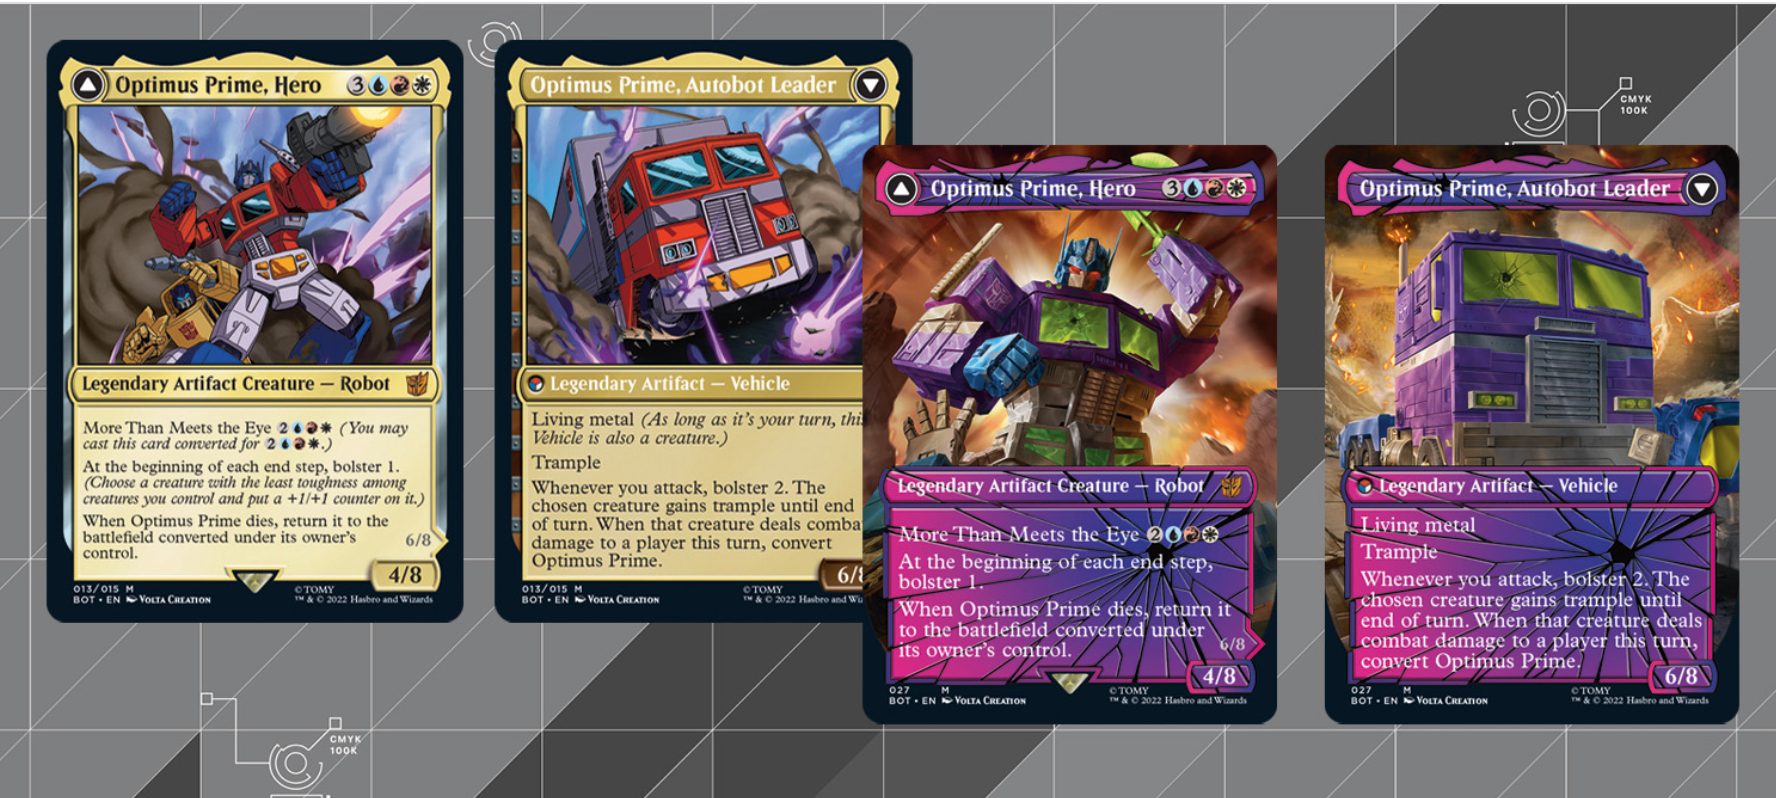 Image for Transformers join Magic: The Gathering